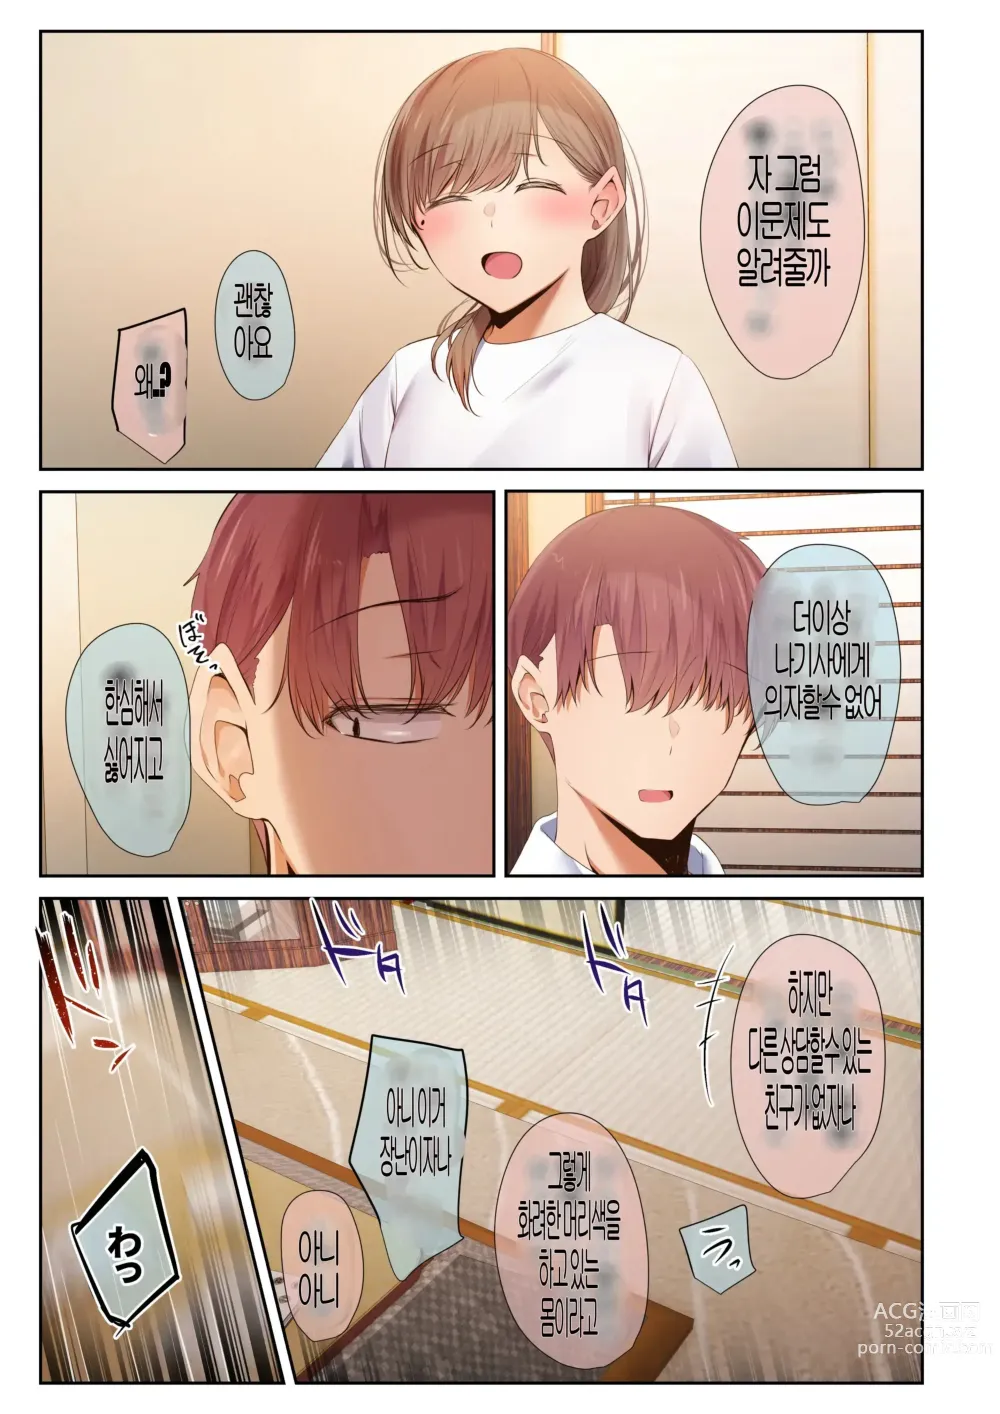 Page 10 of doujinshi A story about my favorite senior, who can be trusted, is made into a female by Yarichin. 의지할수 있는 선배가 야한친구에 의해 암컷이된 이야기